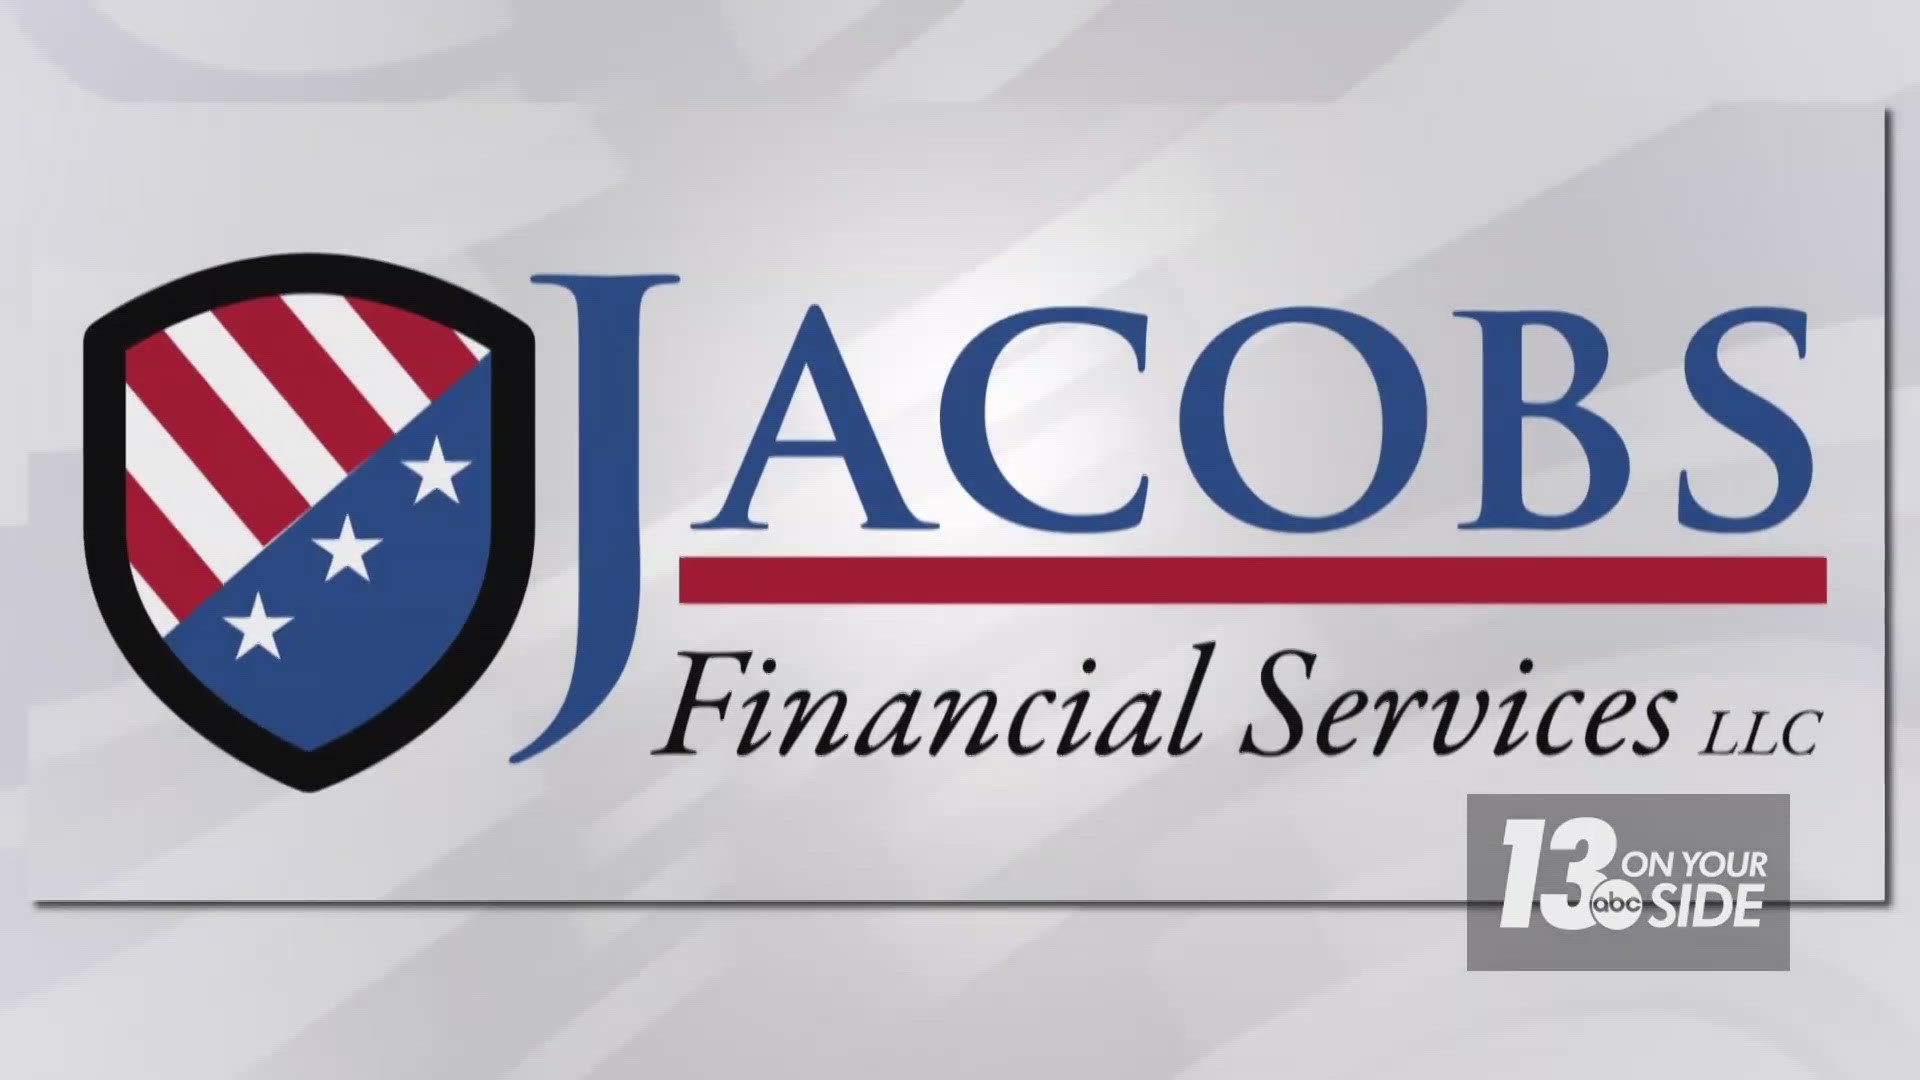 Tom Jacobs joined us from Jacobs Financial Services with advice on planning for retirement.